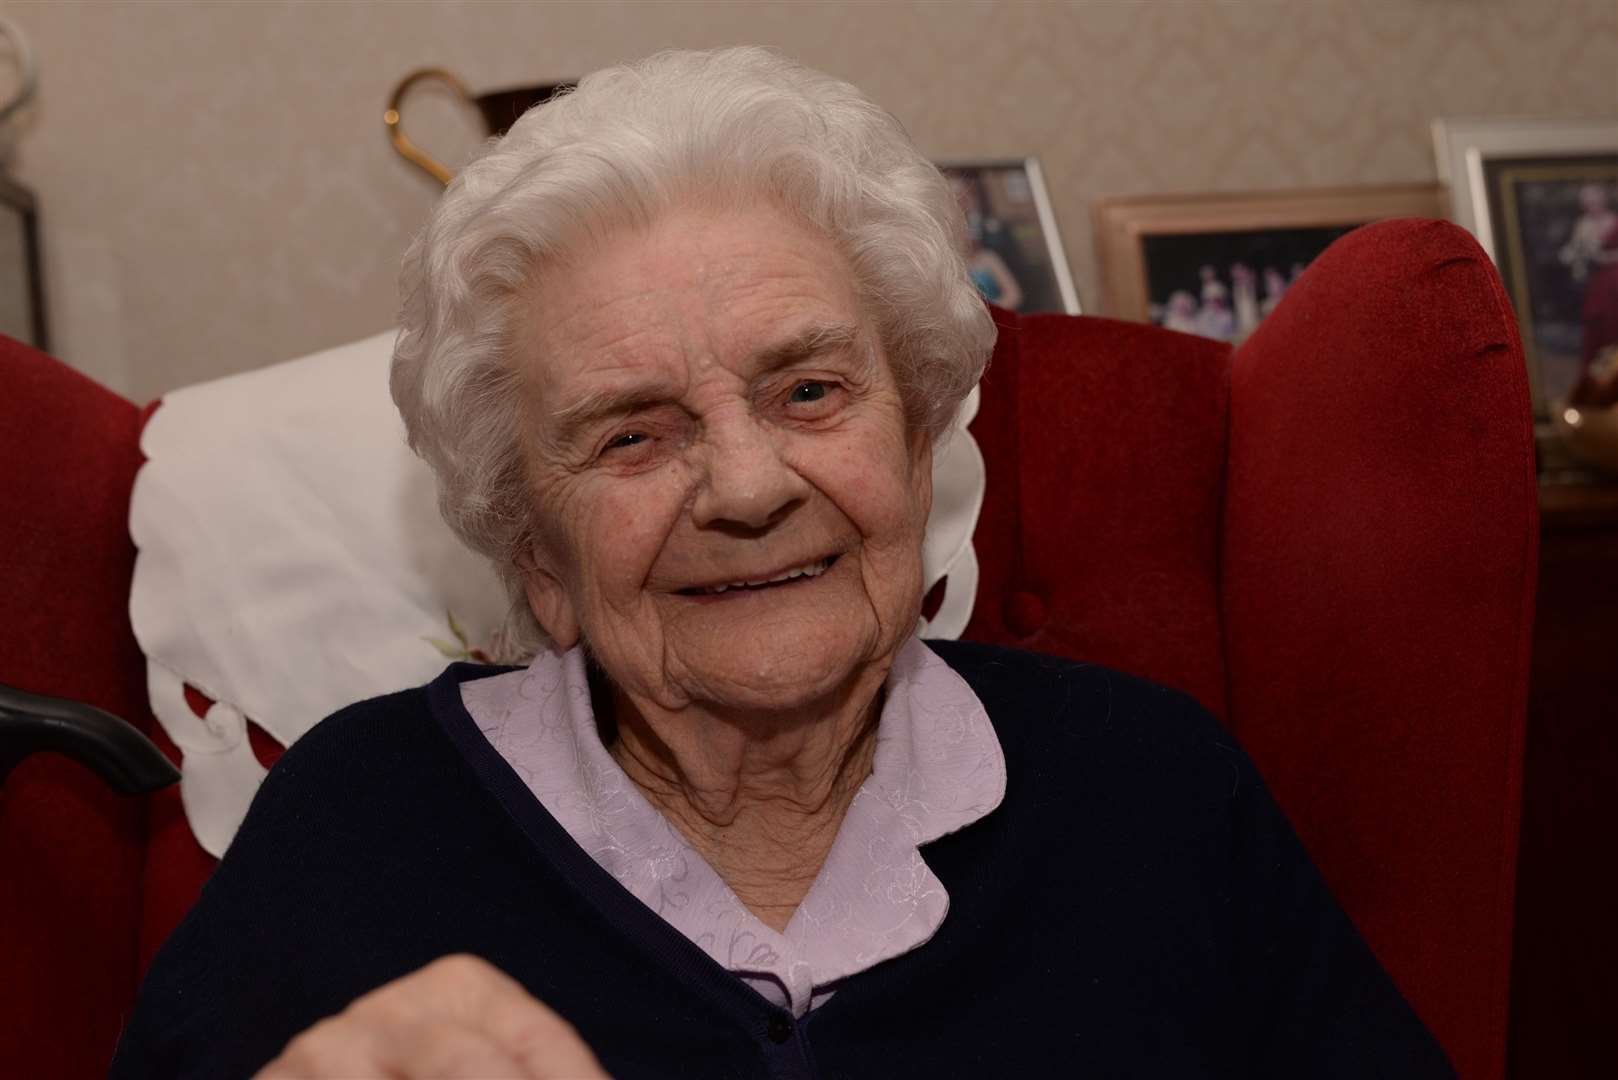 Blanche is celebrating her 100th birthday from her home in Higham